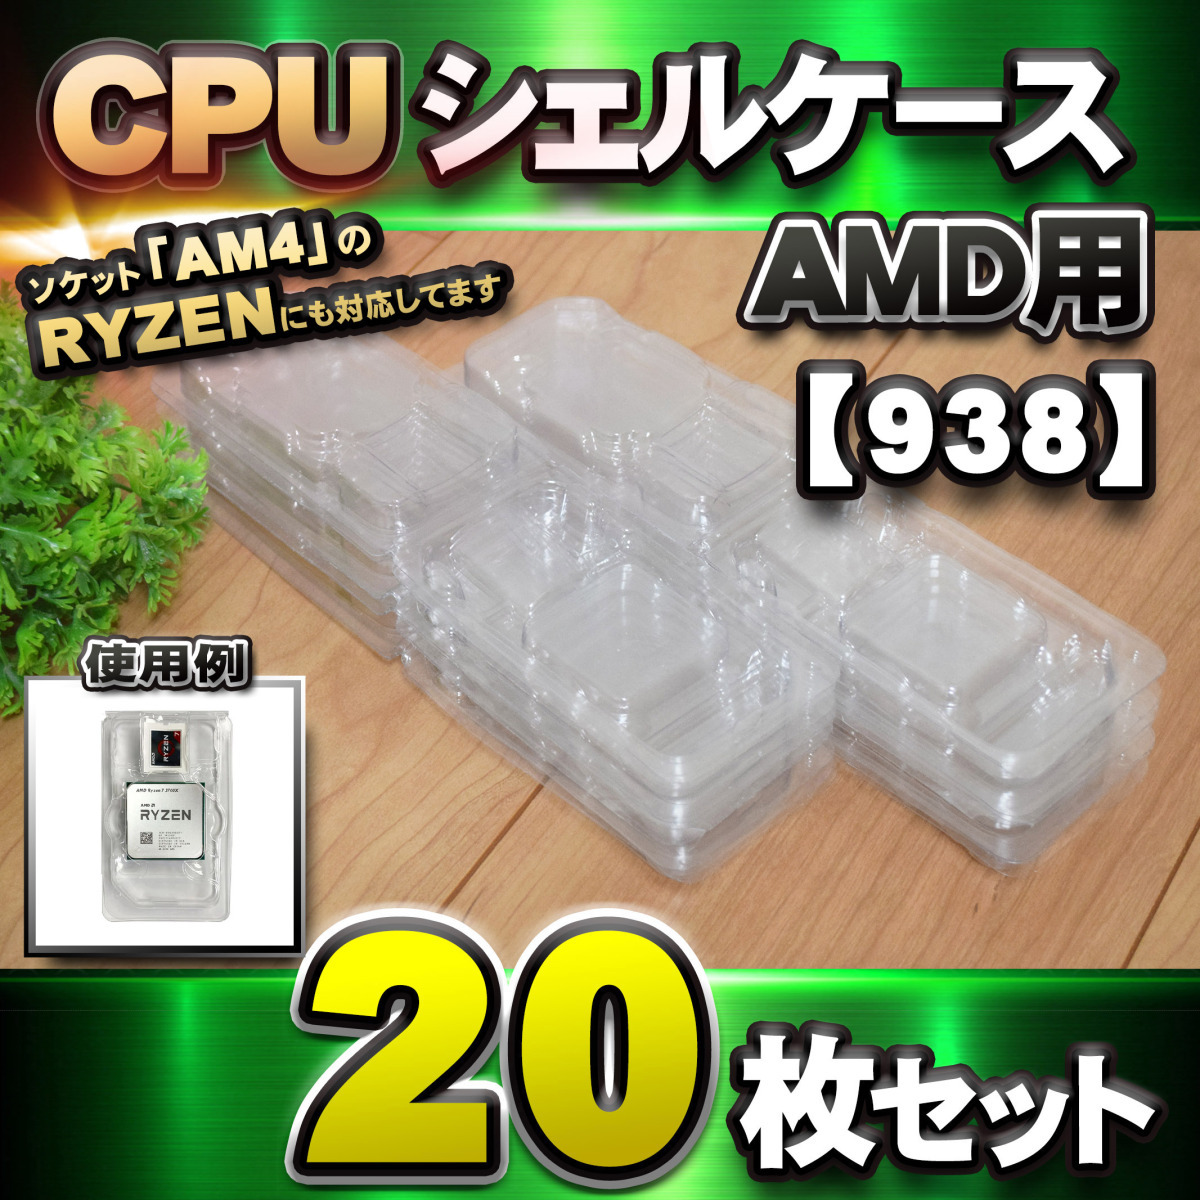 [ APU correspondence ]CPU shell case AMD for plastic [AM4. RYZEN also correspondence ] storage storage case 20 pieces set 